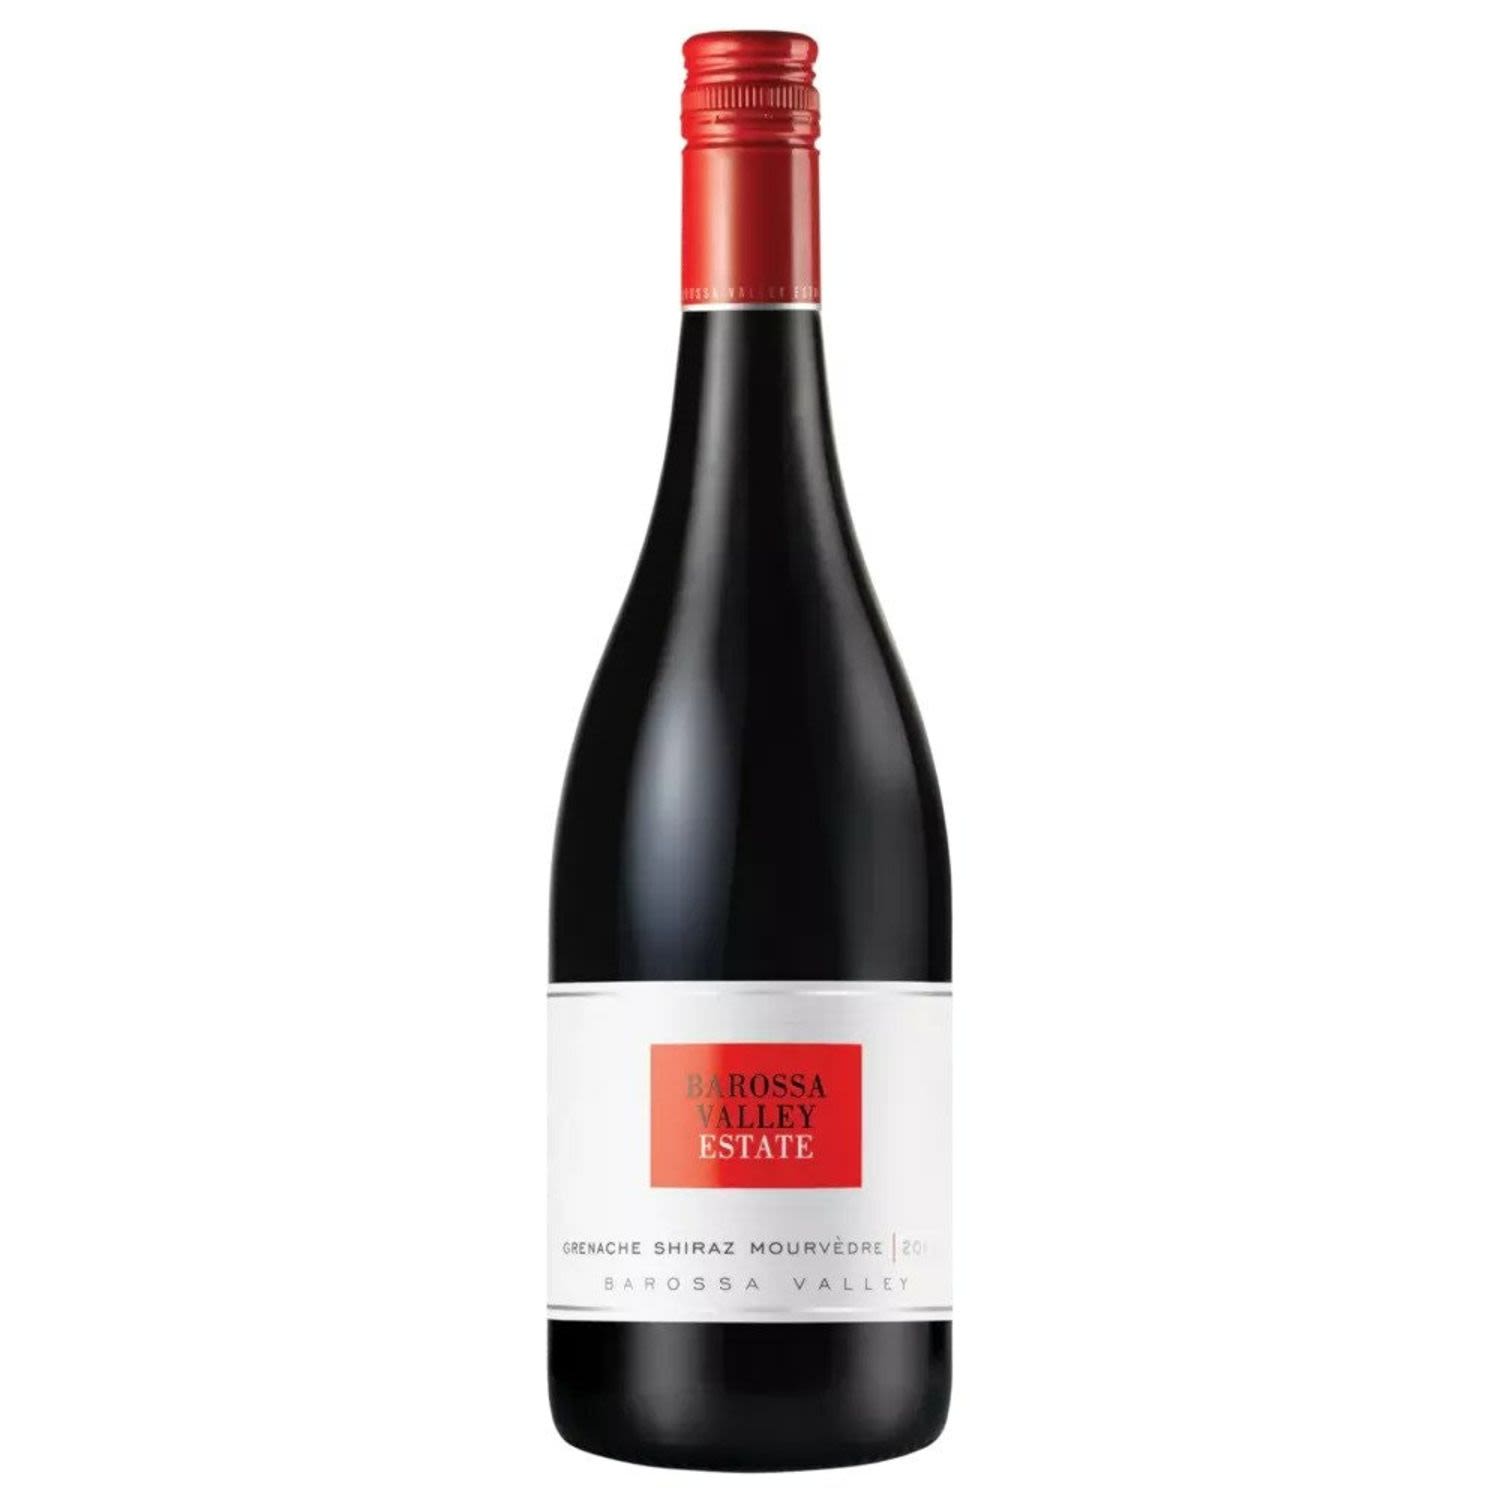 The Barossa Valley created and is still home to, the greatest Shiraz in the world. Our Shiraz has an elegant fine texture, with hallmark exotic spice and vibrant flavours of red plum and fresh blackberry.<br /> <br />Alcohol Volume: 13.50%<br /><br />Pack Format: Bottle<br /><br />Standard Drinks: 8</br /><br />Pack Type: Bottle<br /><br />Country of Origin: Australia<br /><br />Region: Barossa Valley<br /><br />Vintage: Vintages Vary<br />